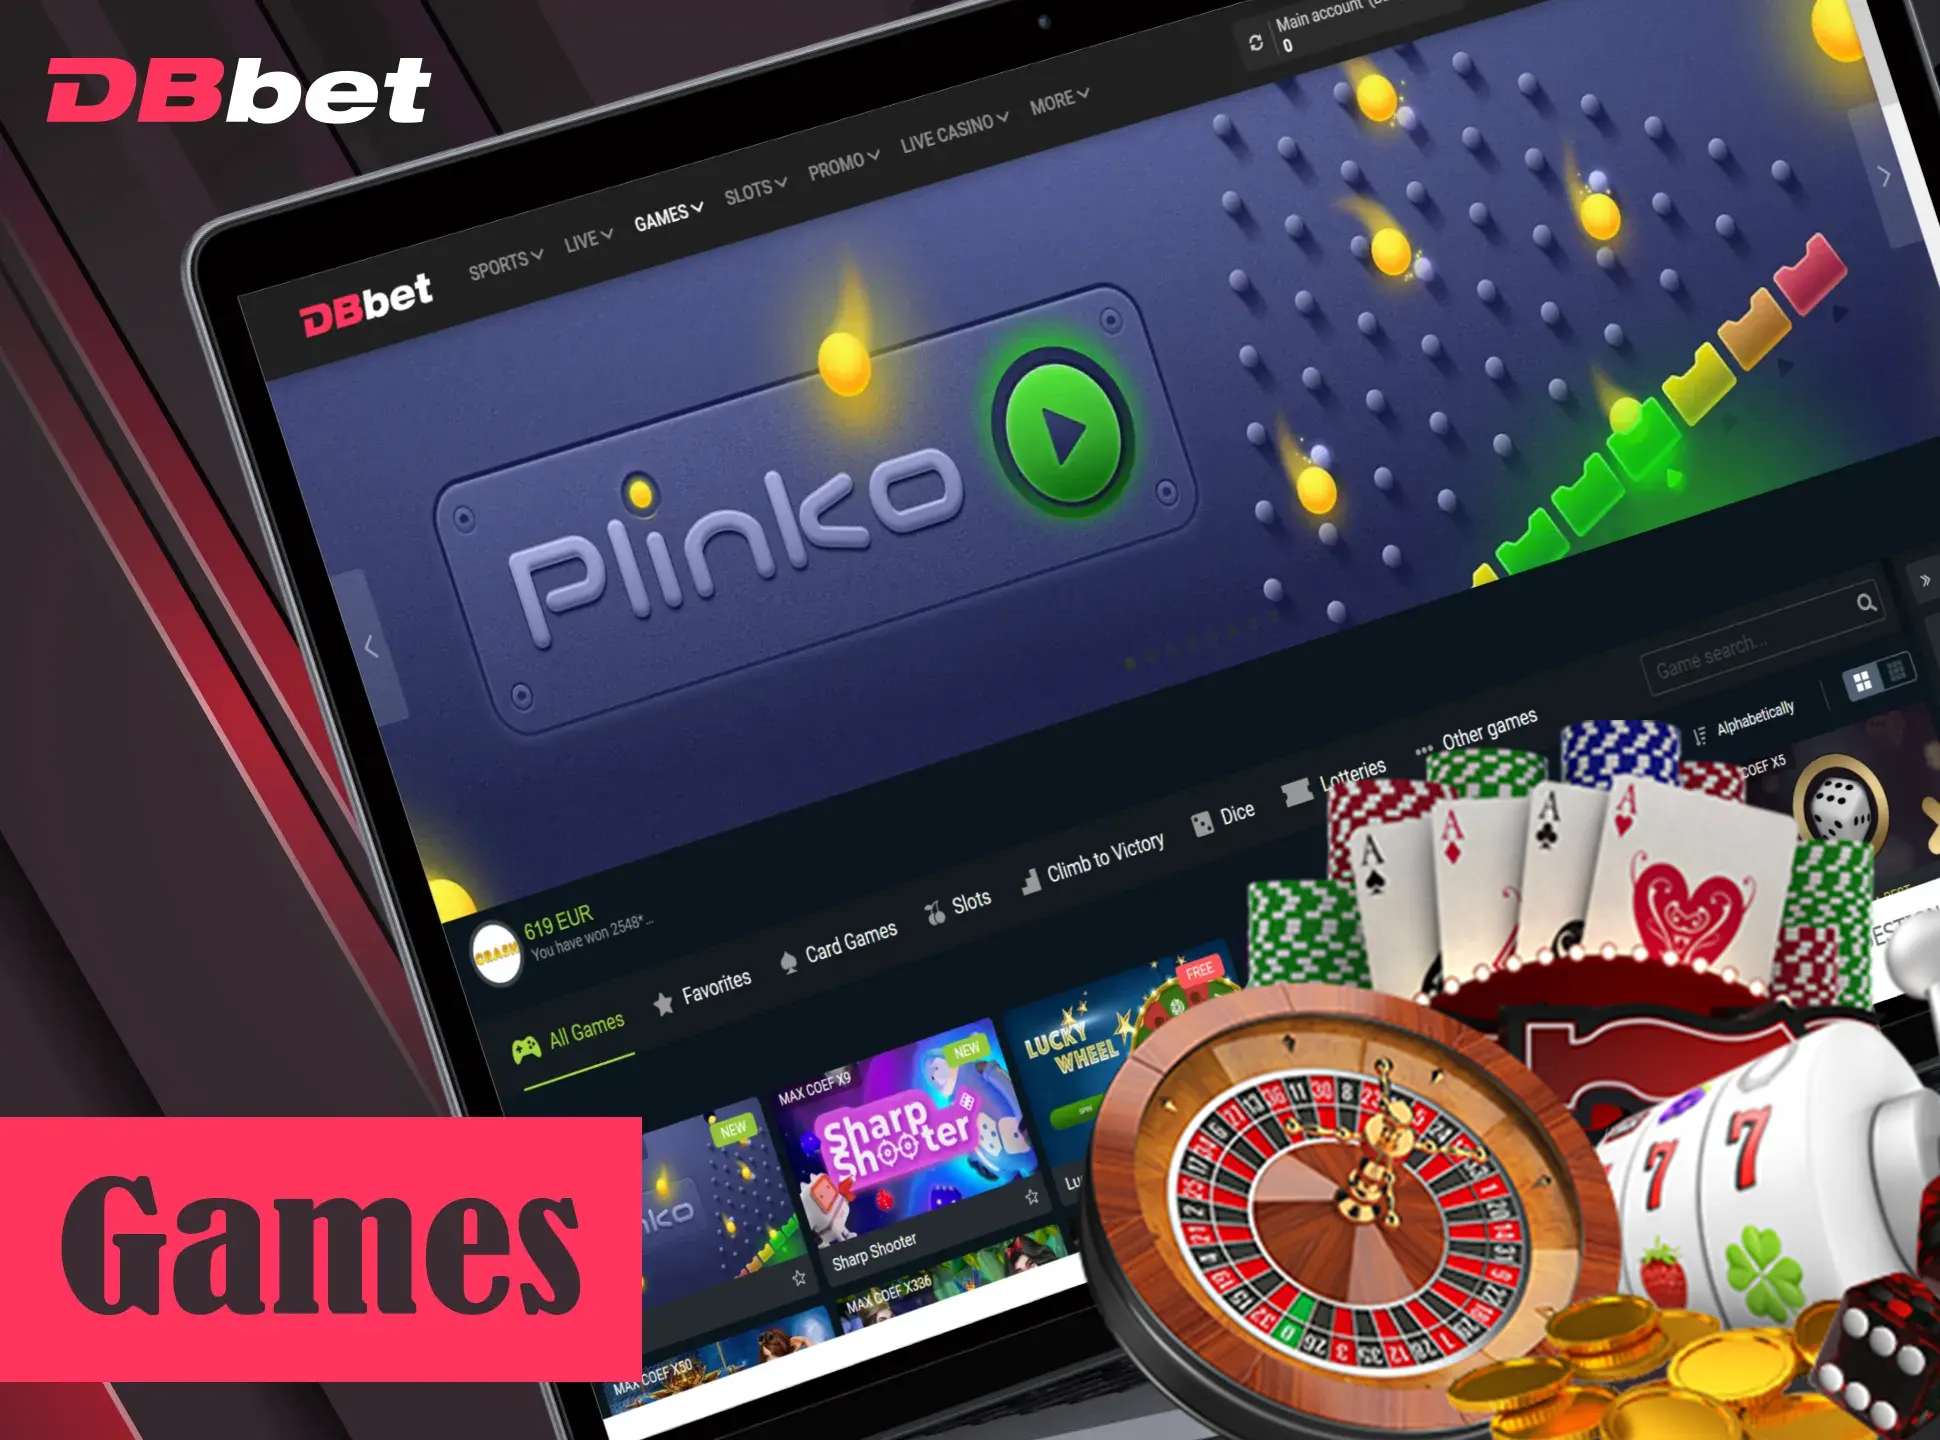 Play different casino games at DBbet.